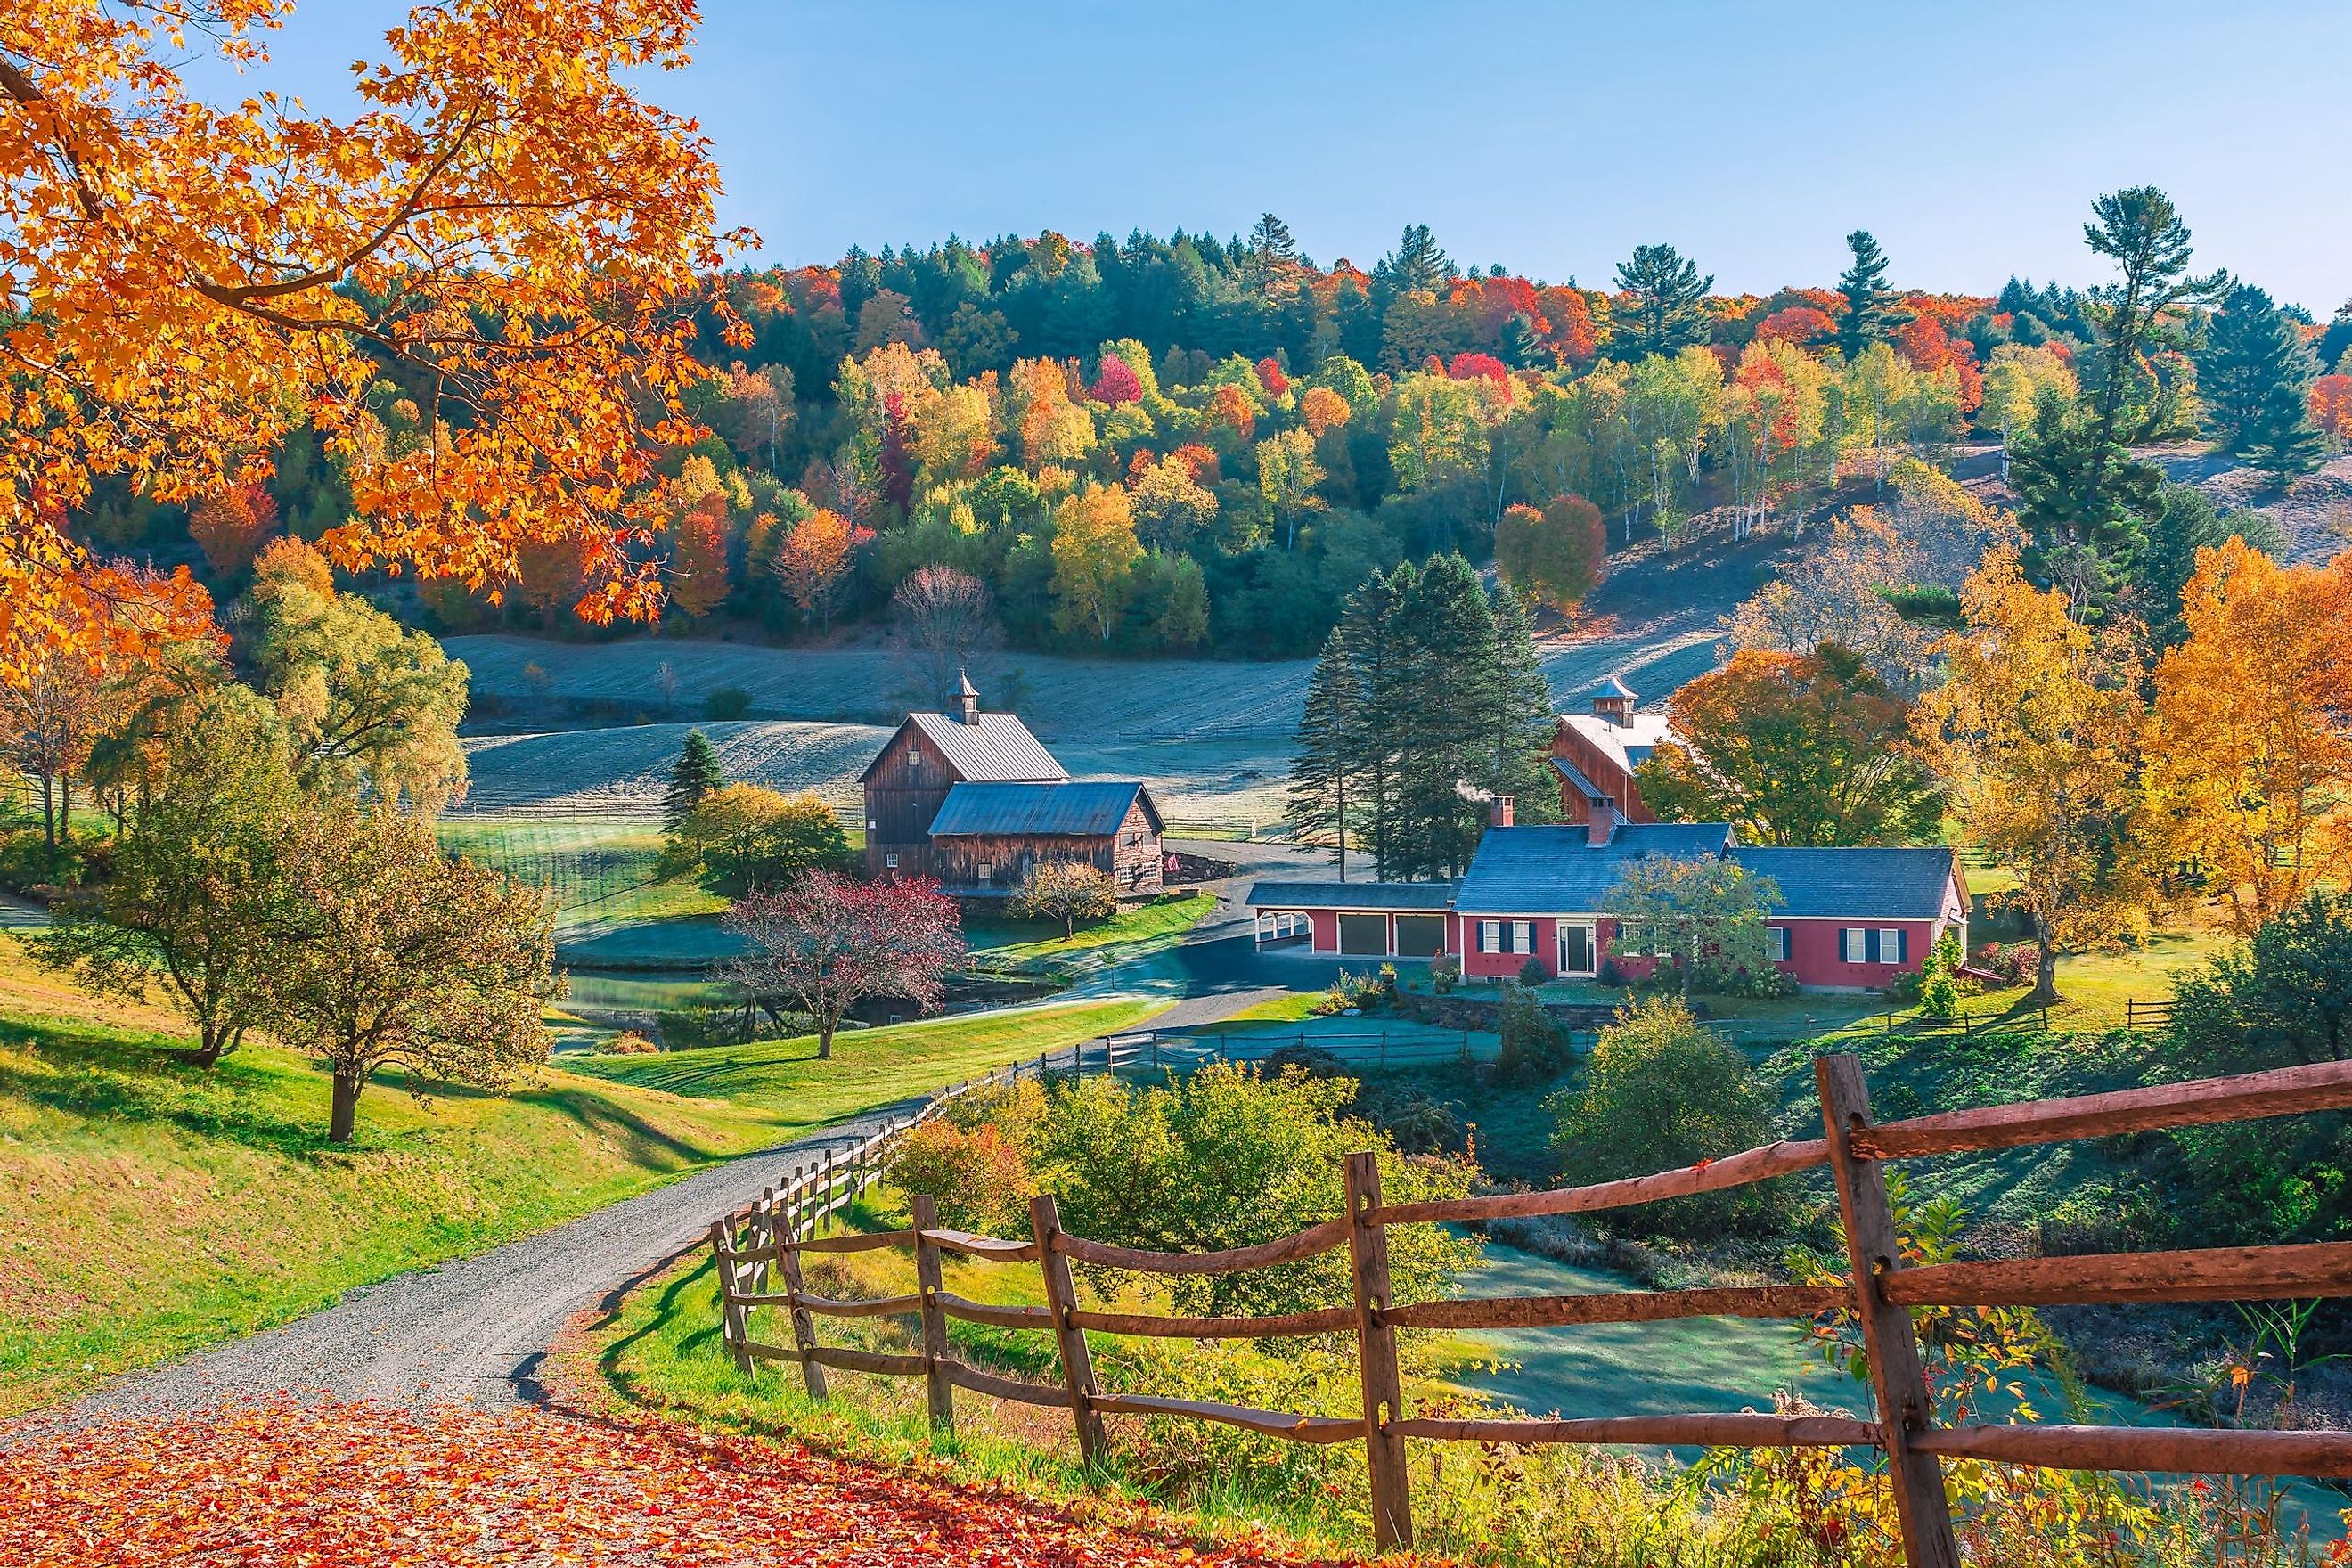 Early autumn foliage scene of houses in the Vermont mountains, Woodstock, Vermont.